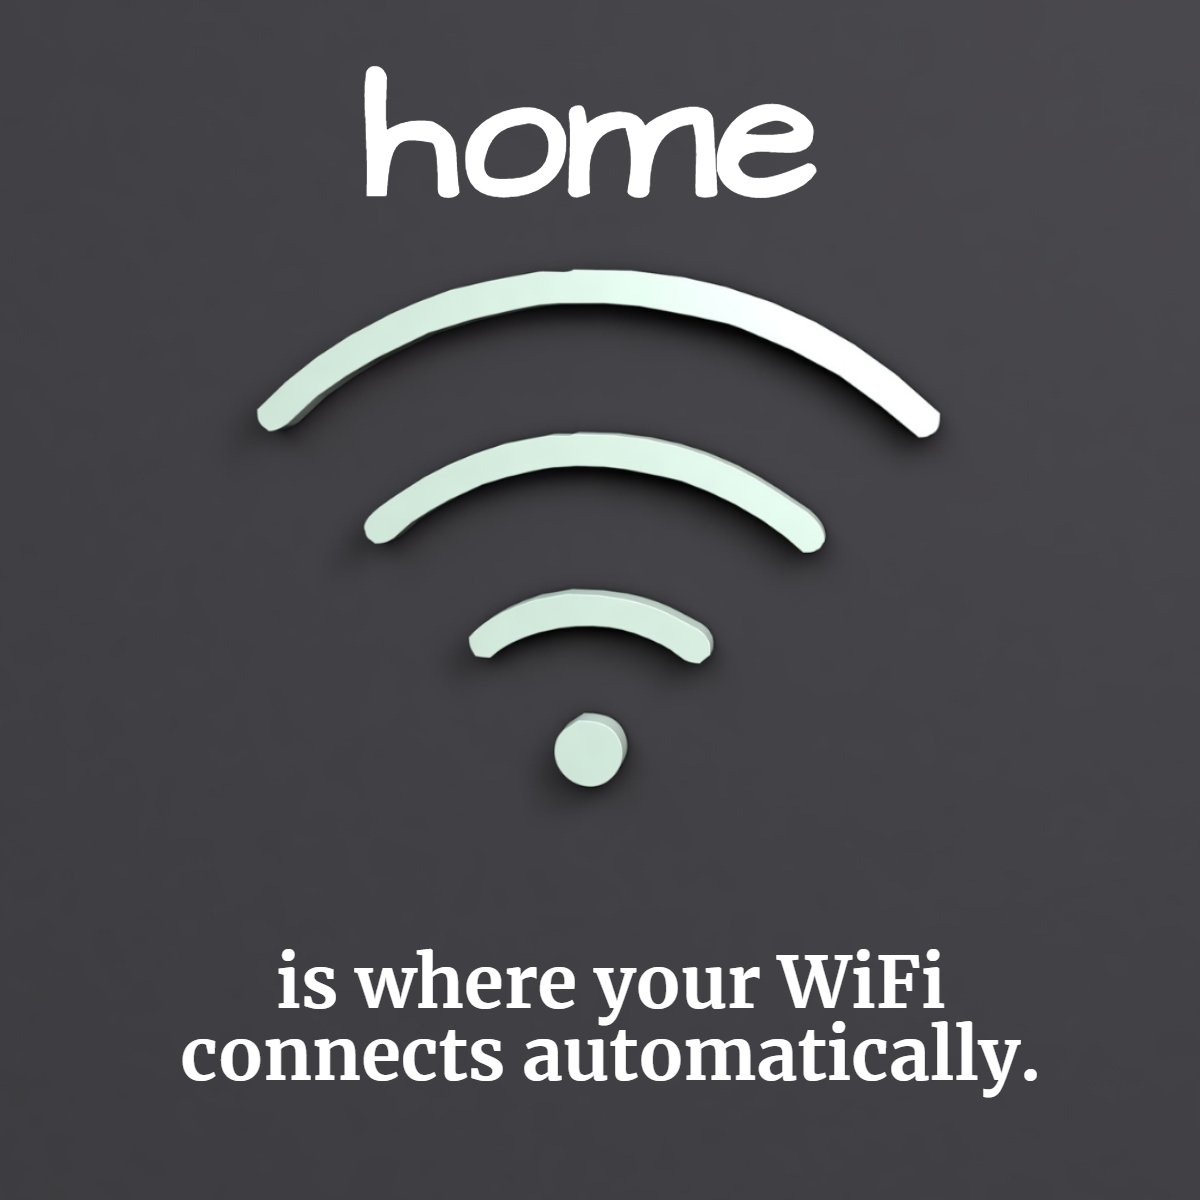 Home is where your WiFi... Connects automatically. 📱📶

#home #wifi #stayhome #homestyle #hometime #homesofinstagram #wearehome
 #tampa #newtampa #tampapalms #tampabay #fsbo #firstimehomebuyer #movingtoflorida #wesleychapel #lutz #landolakes #zephyrhills #hudson